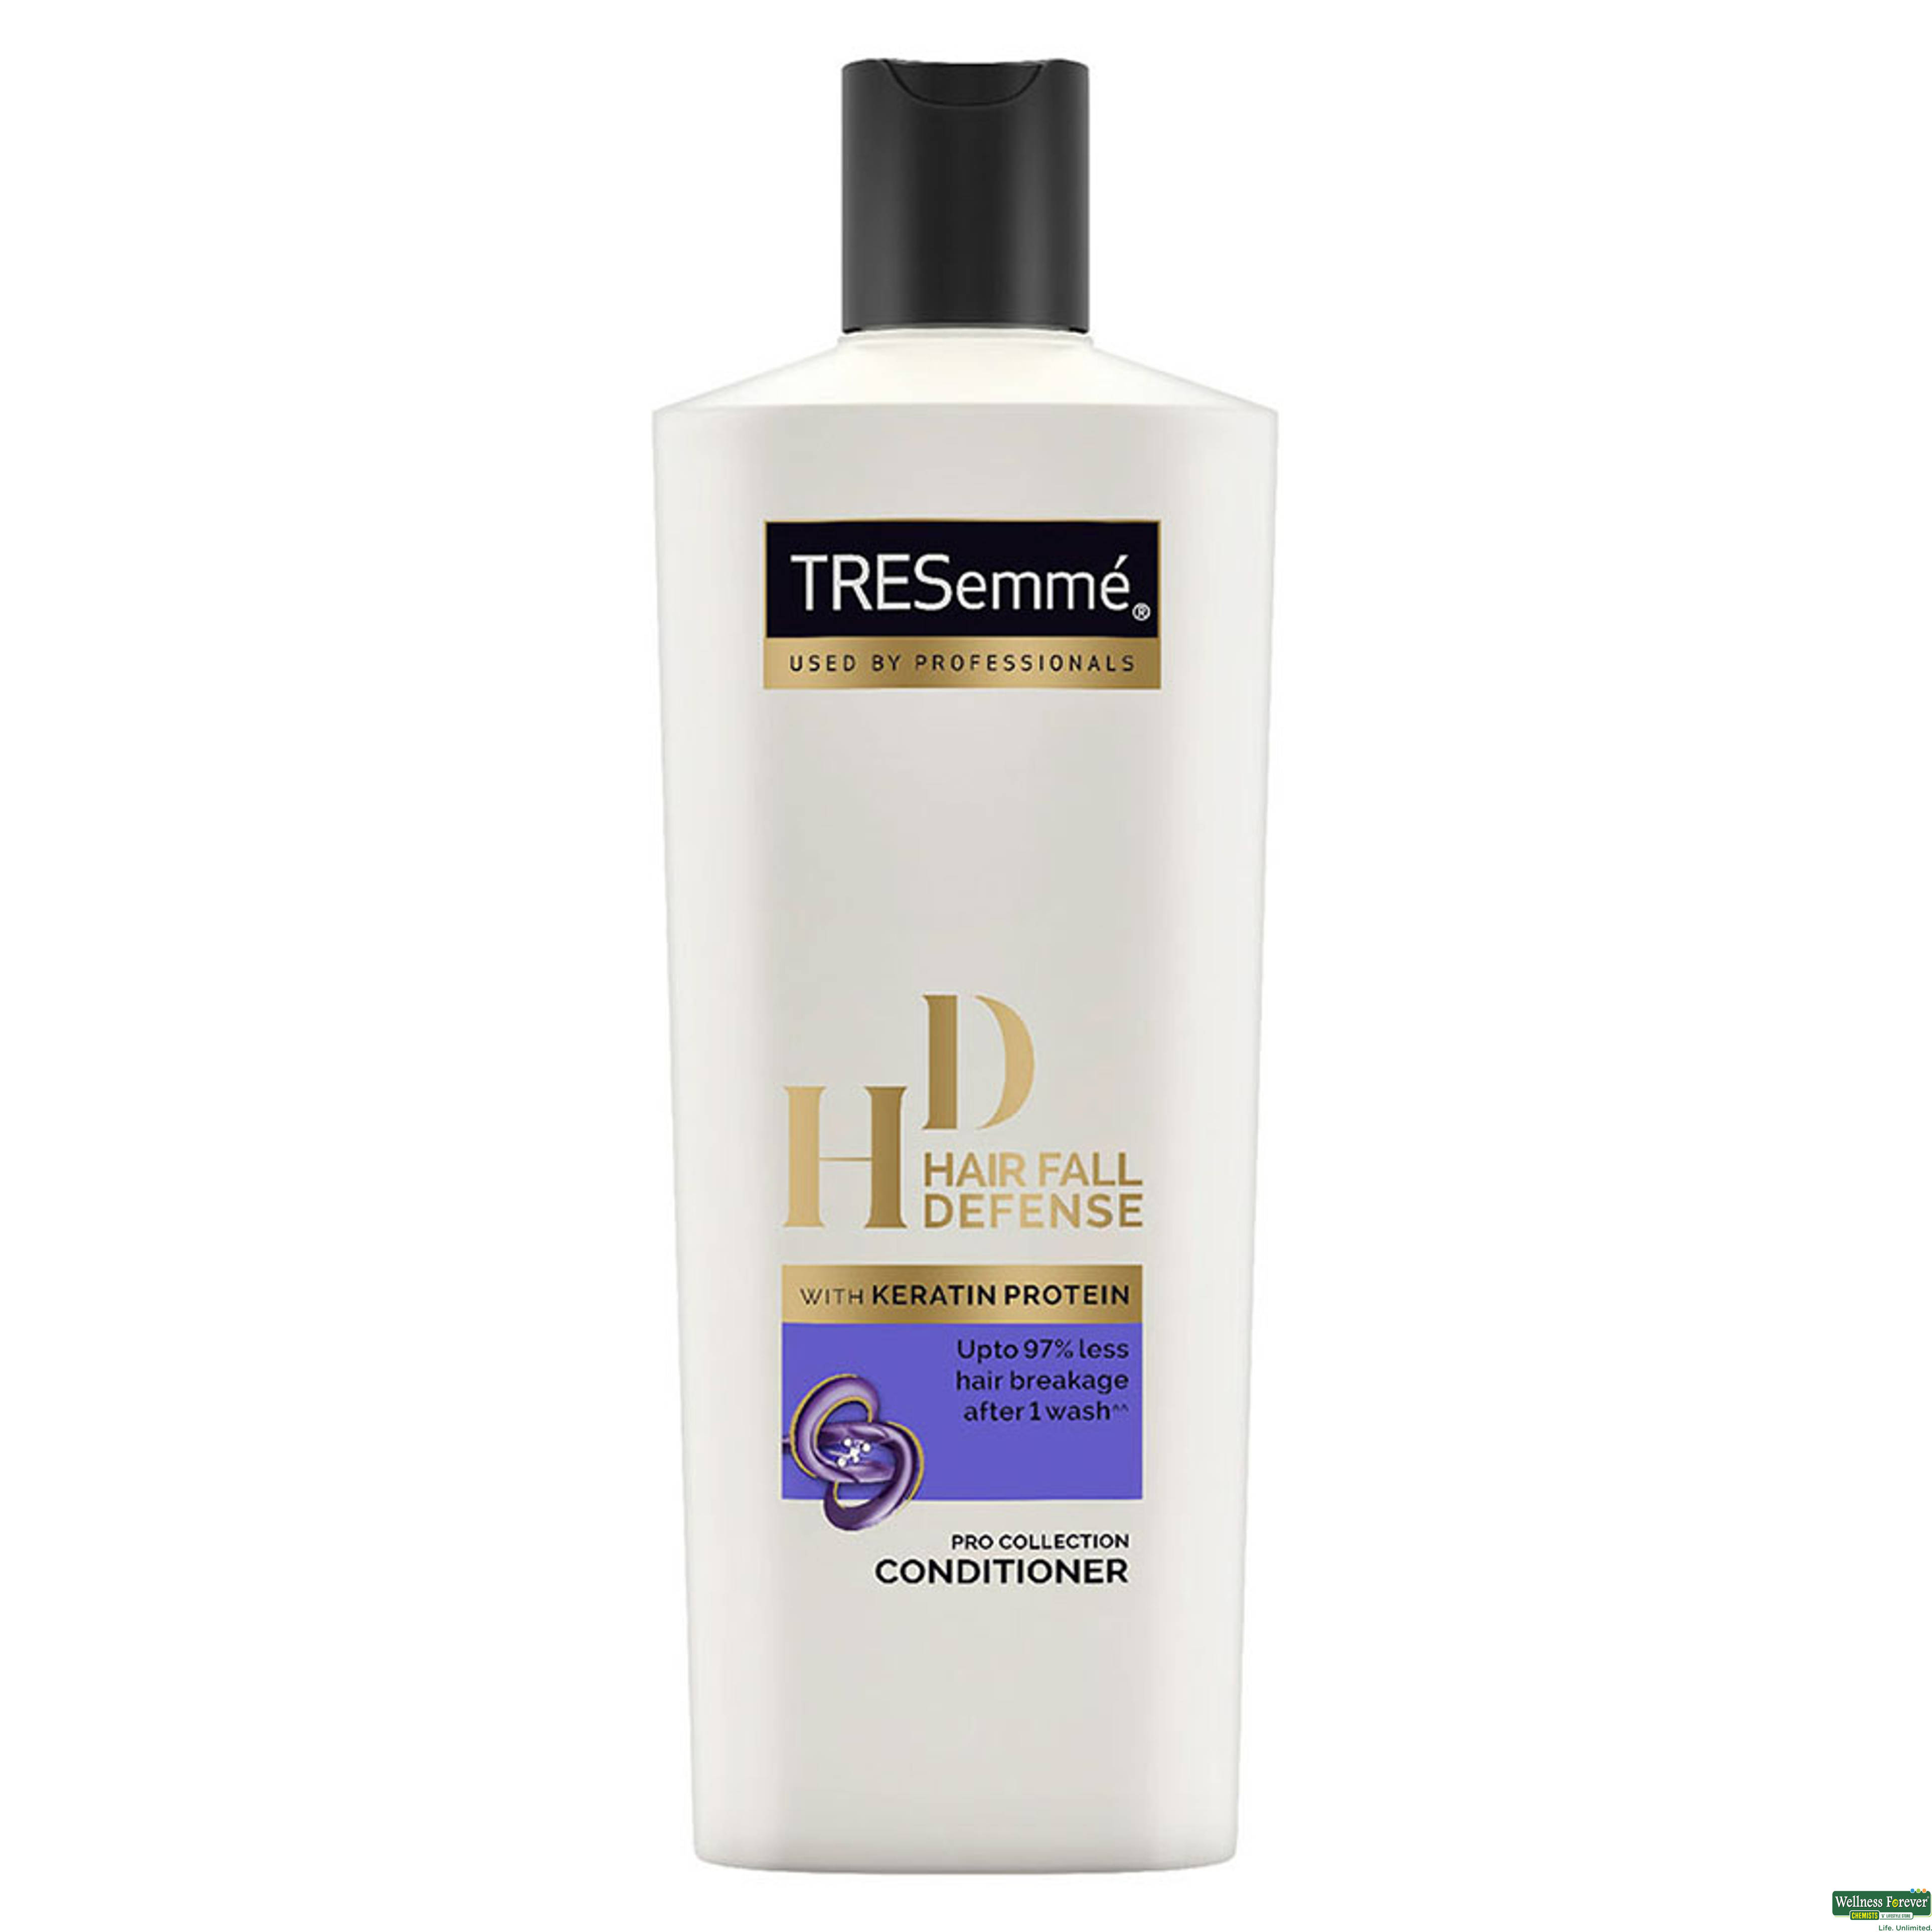 TRESemme Hair Fall Defense Conditioner, 190 ml-image